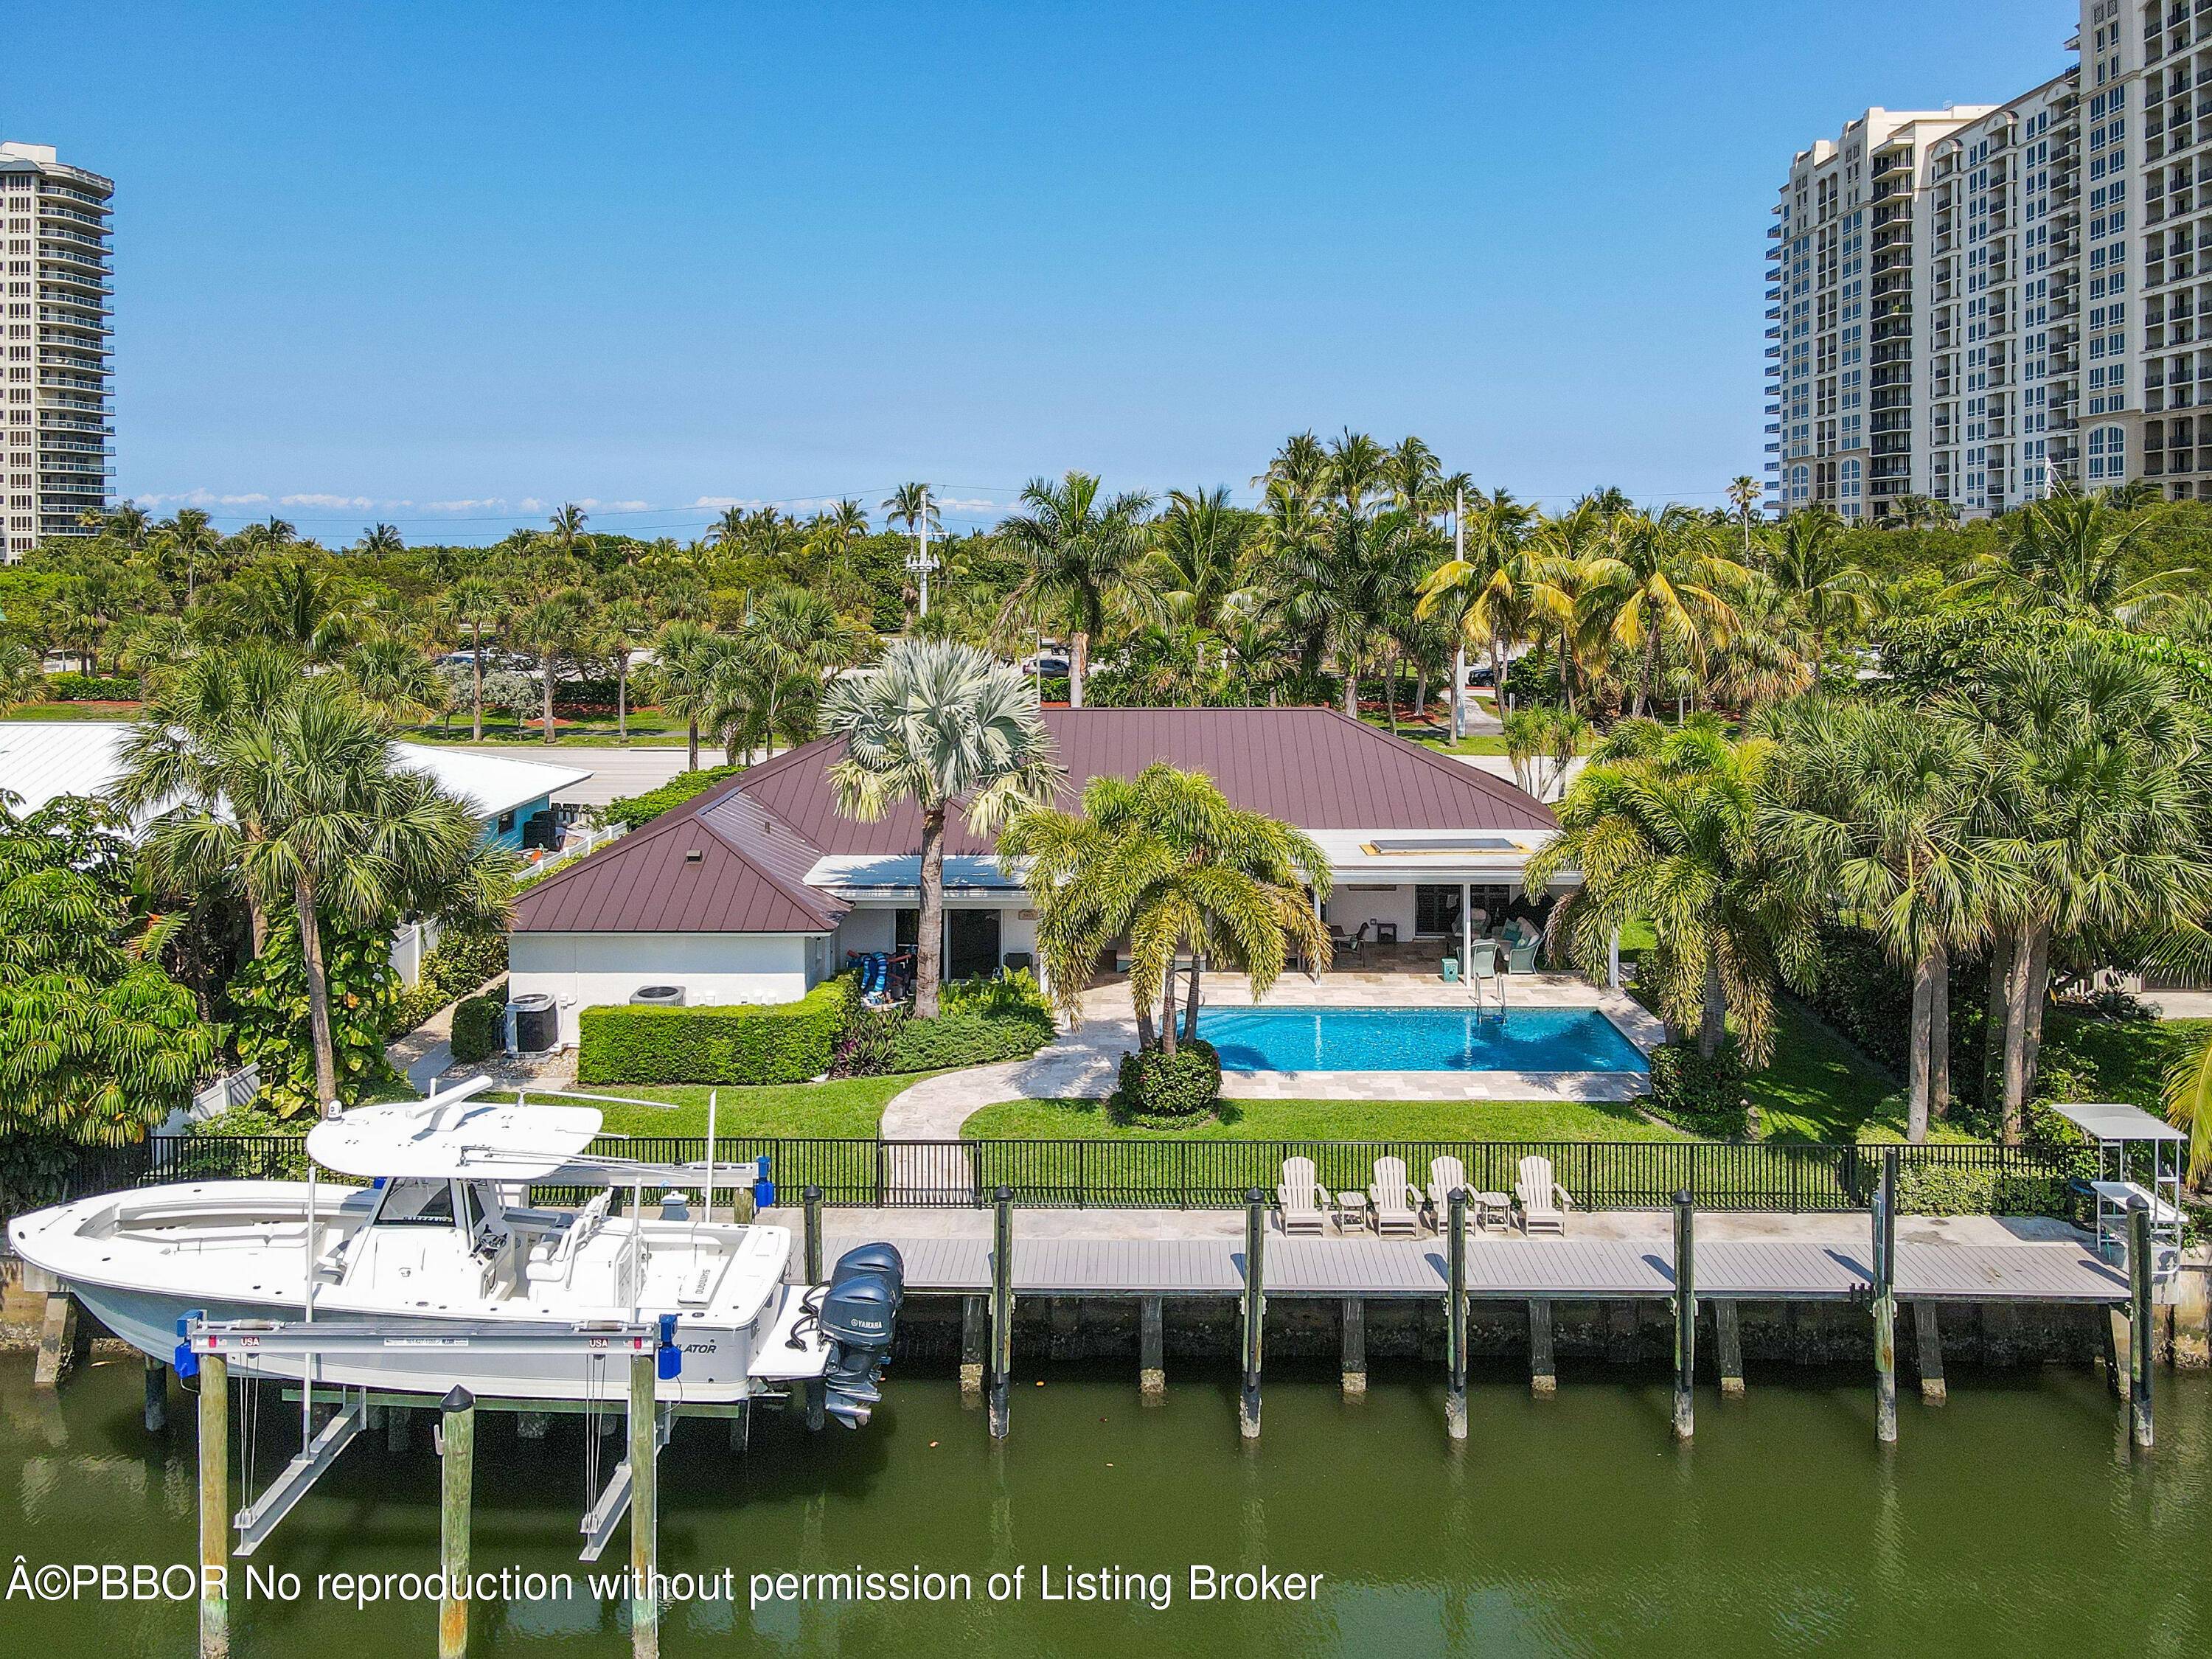 Introducing 3855 N Ocean Drive a luxurious and stunning single family home located on the water.